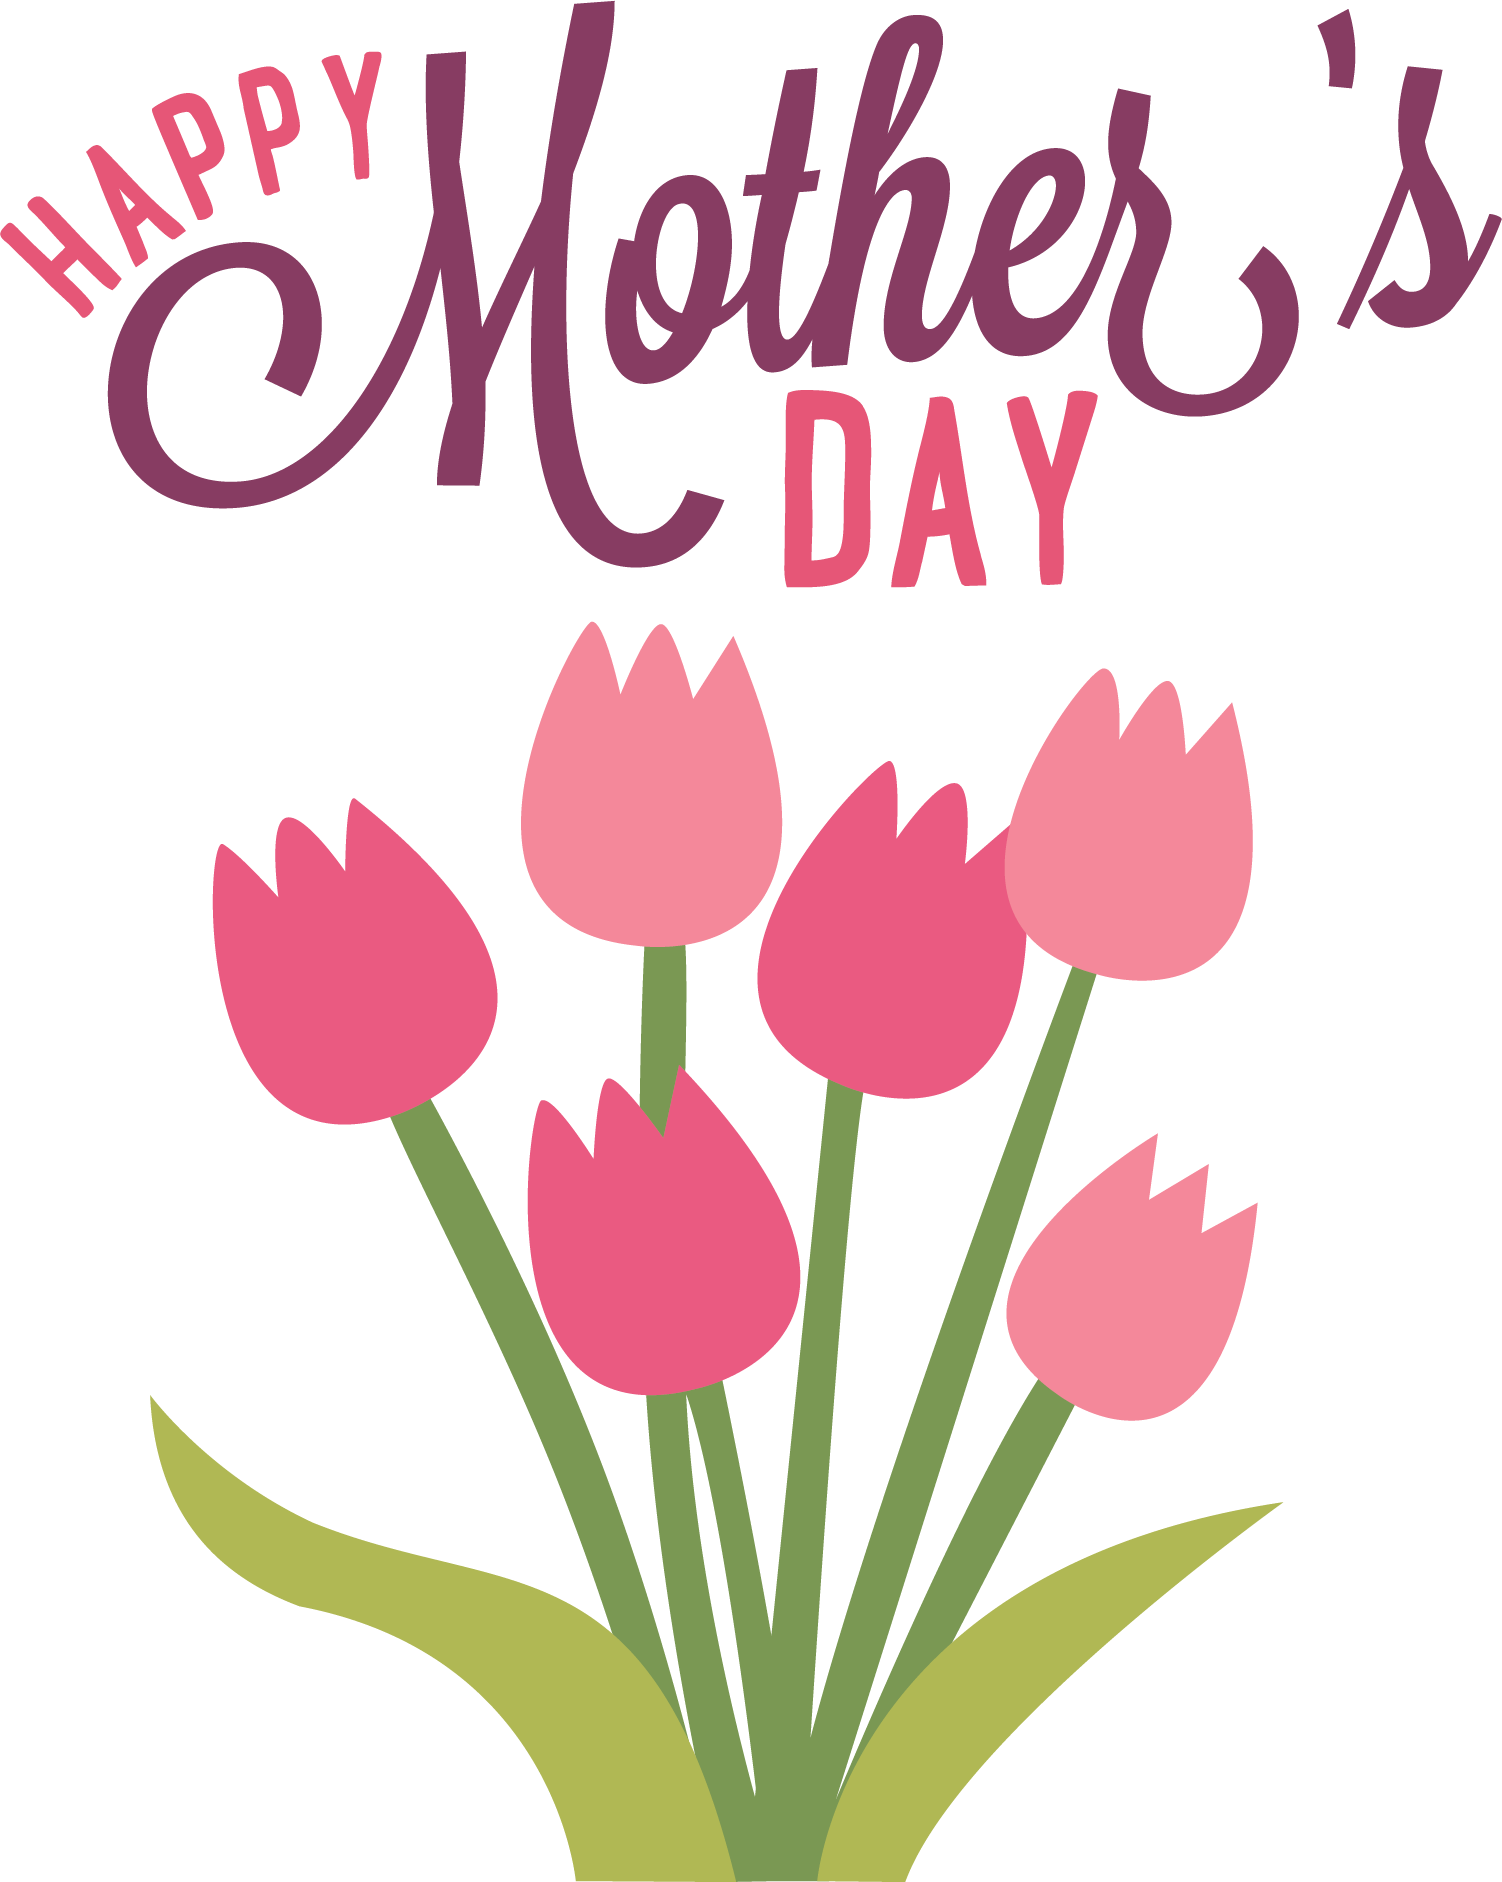 Happy Mothers Day Text Transparent Images